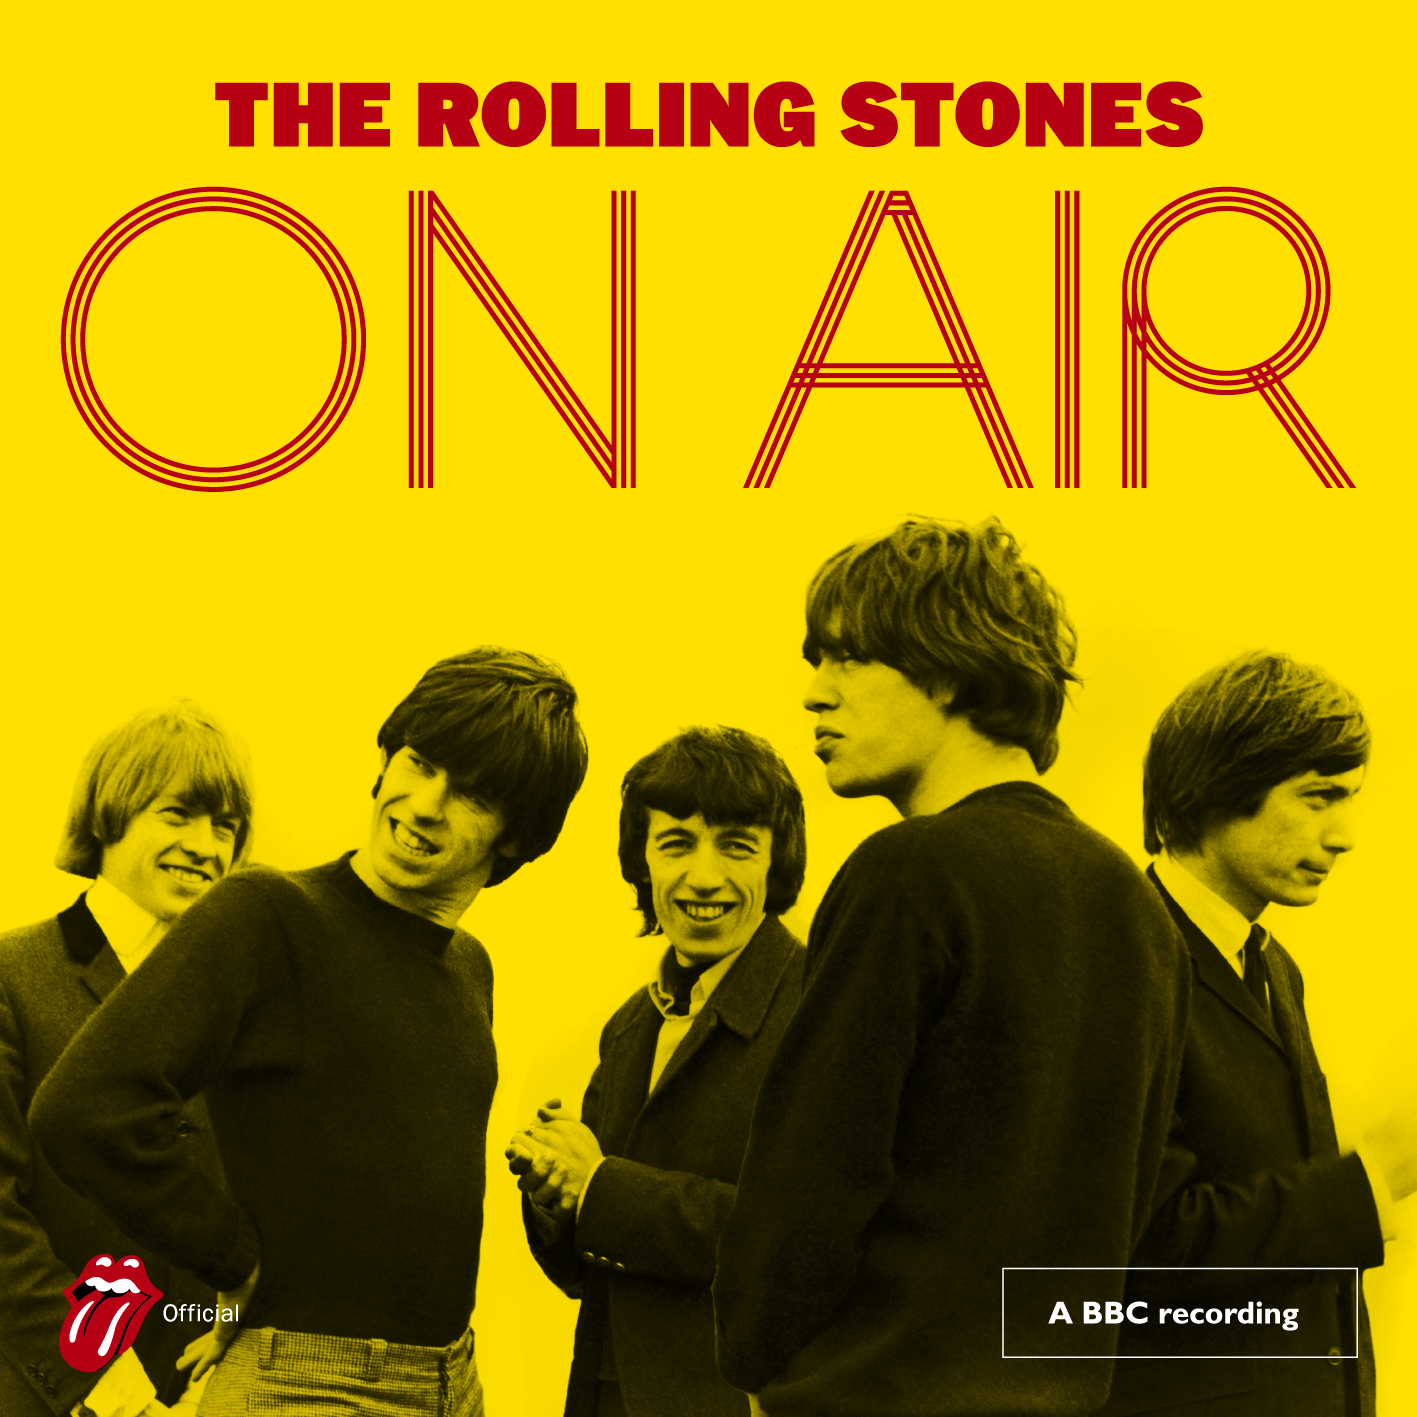 The Rolling Stones On- Air 1963-1965 Album Now Out